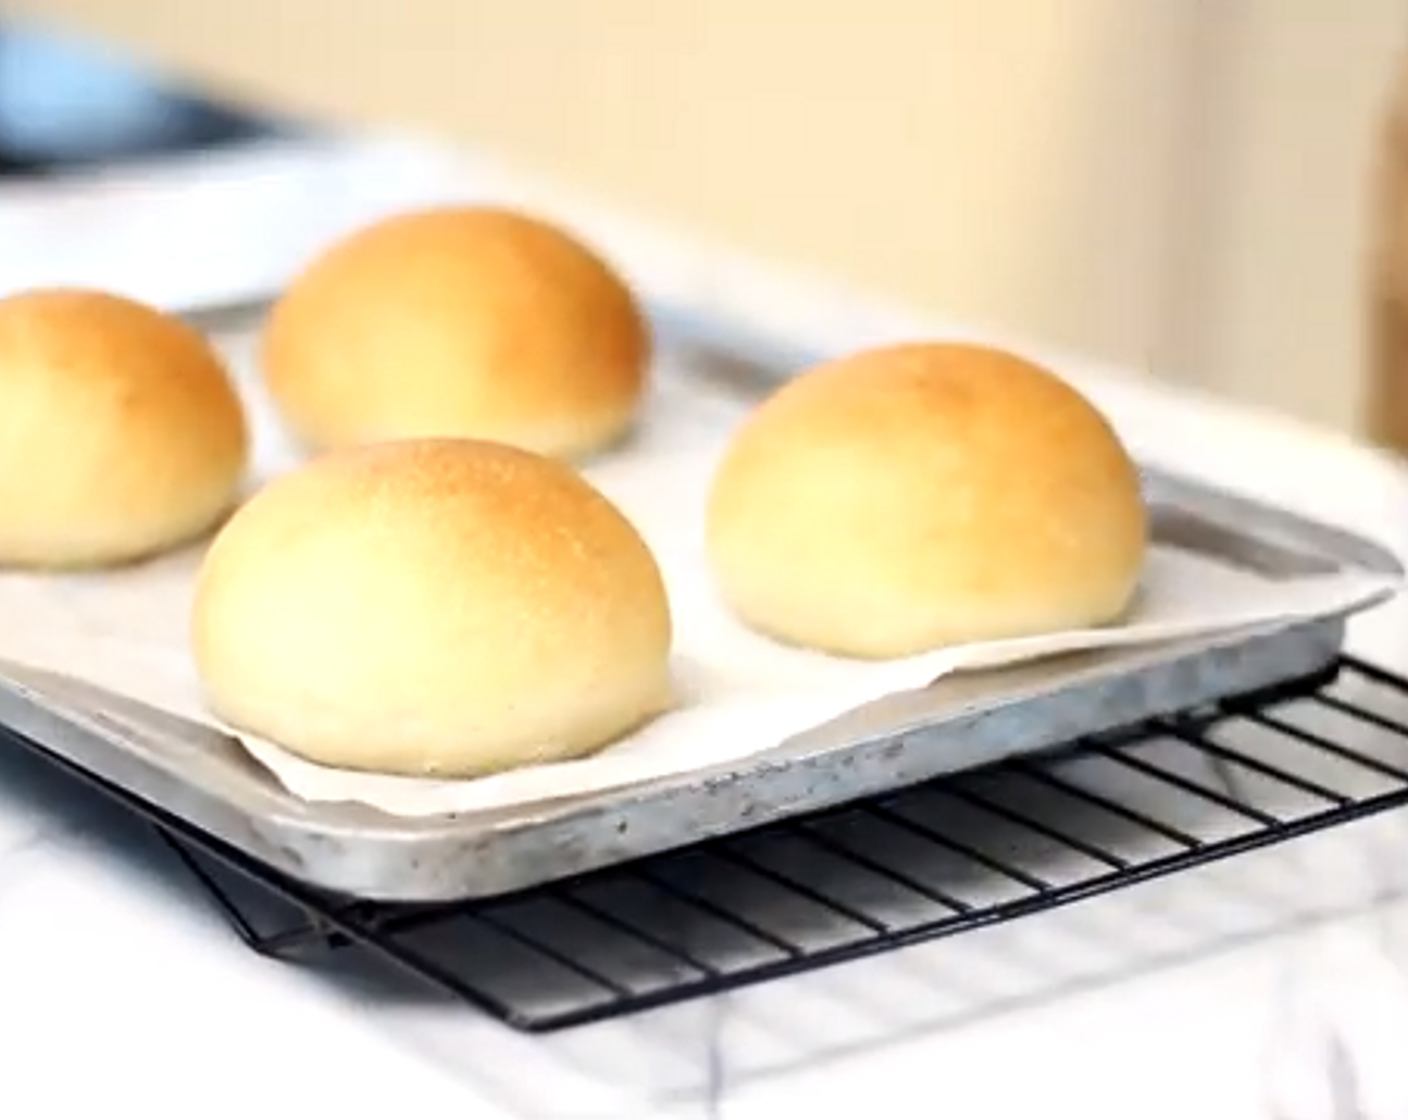 step 8 Remove the bread from the oven once golden brown and cover lightly with a kitchen towel while cooling.